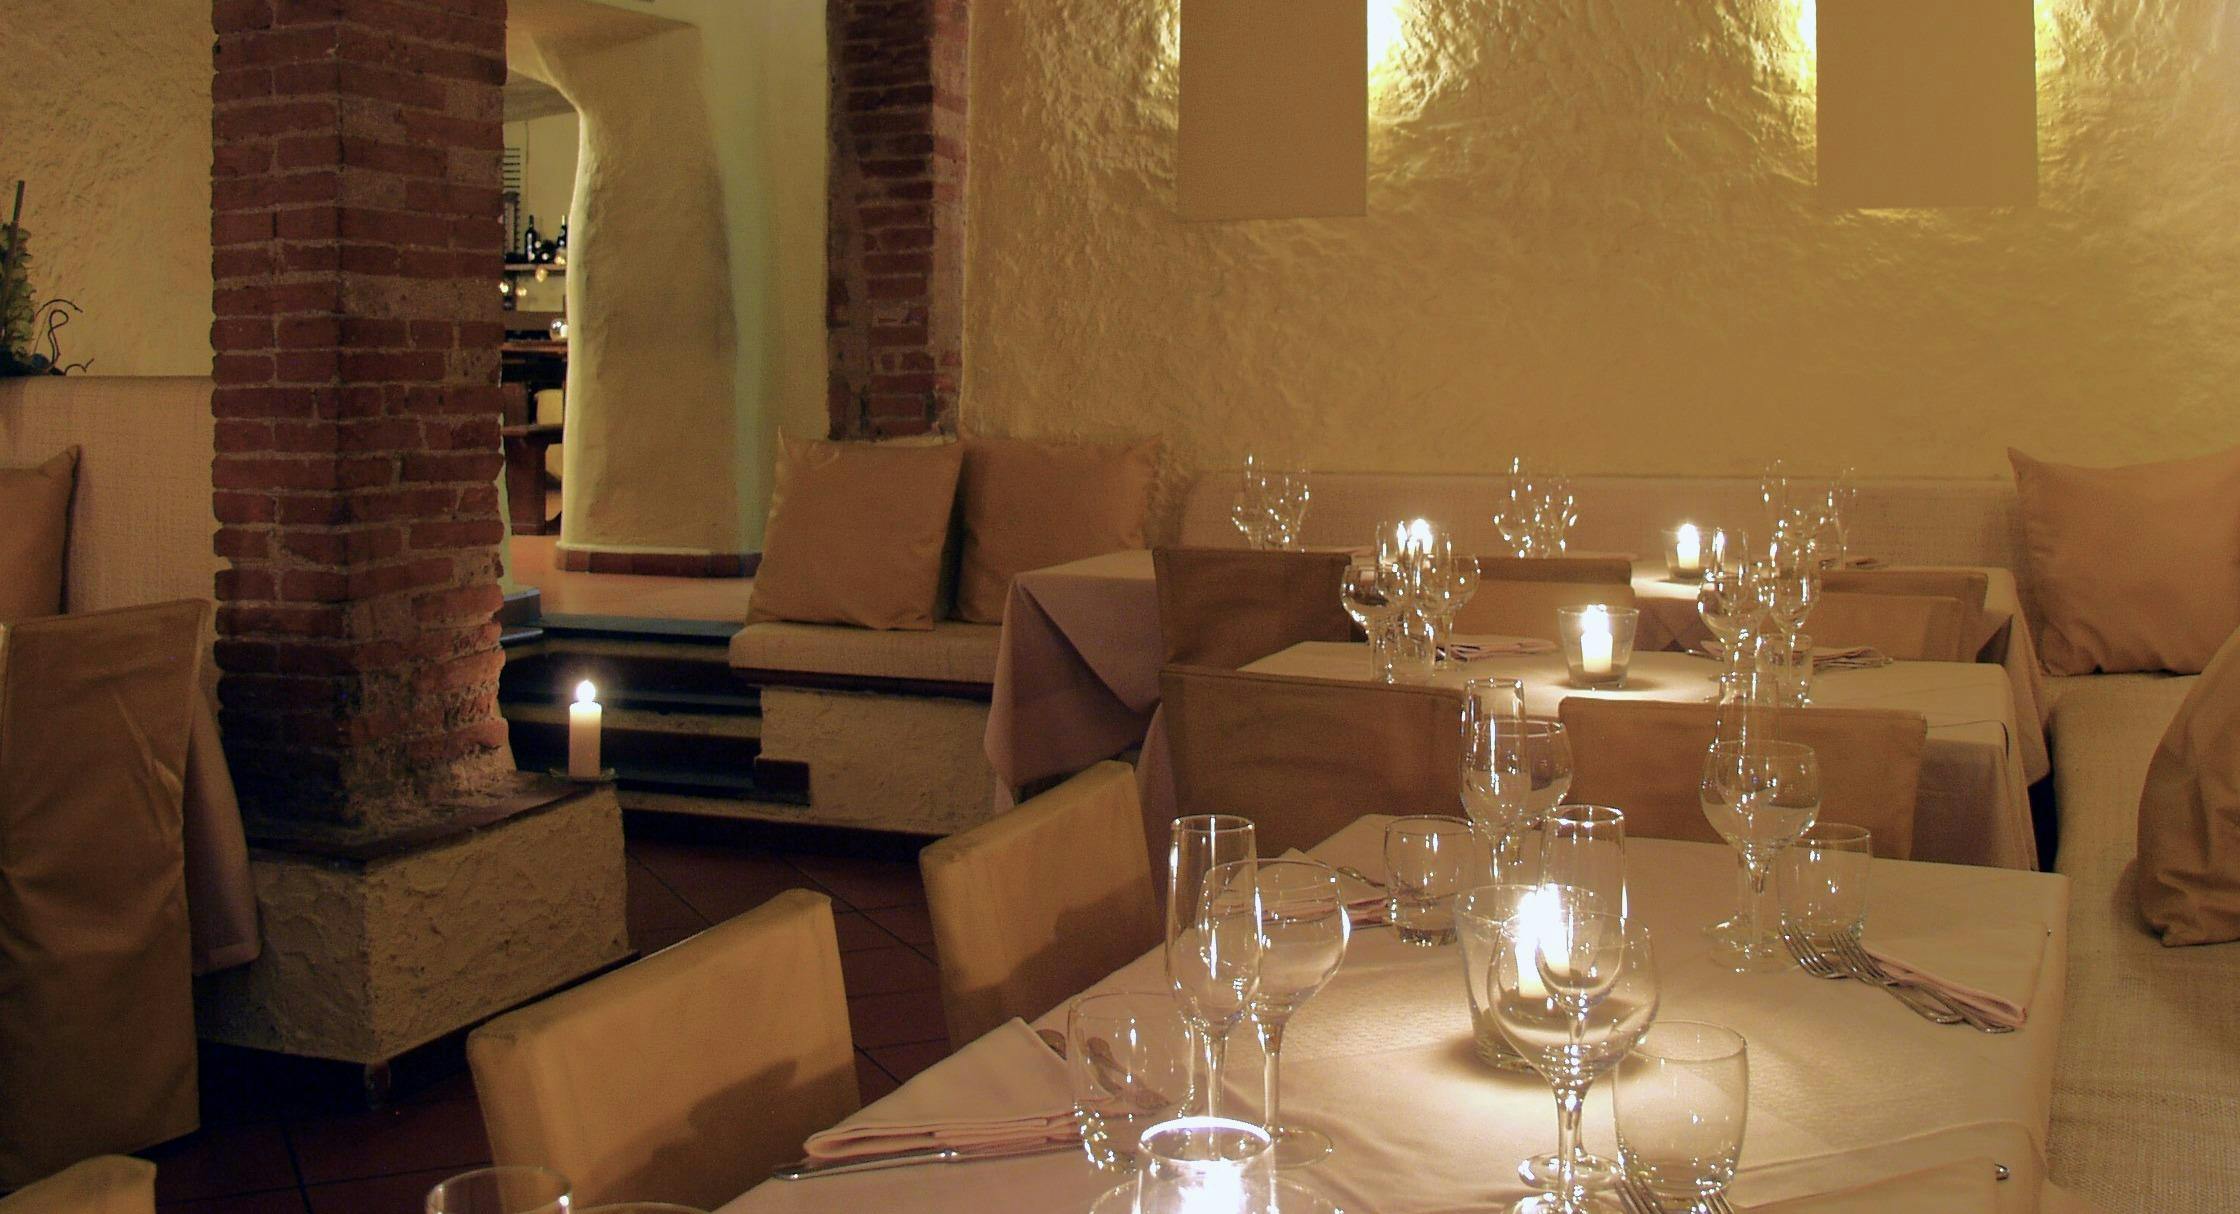 Photo of restaurant Cantina Barbagianni in Centro storico, Florence